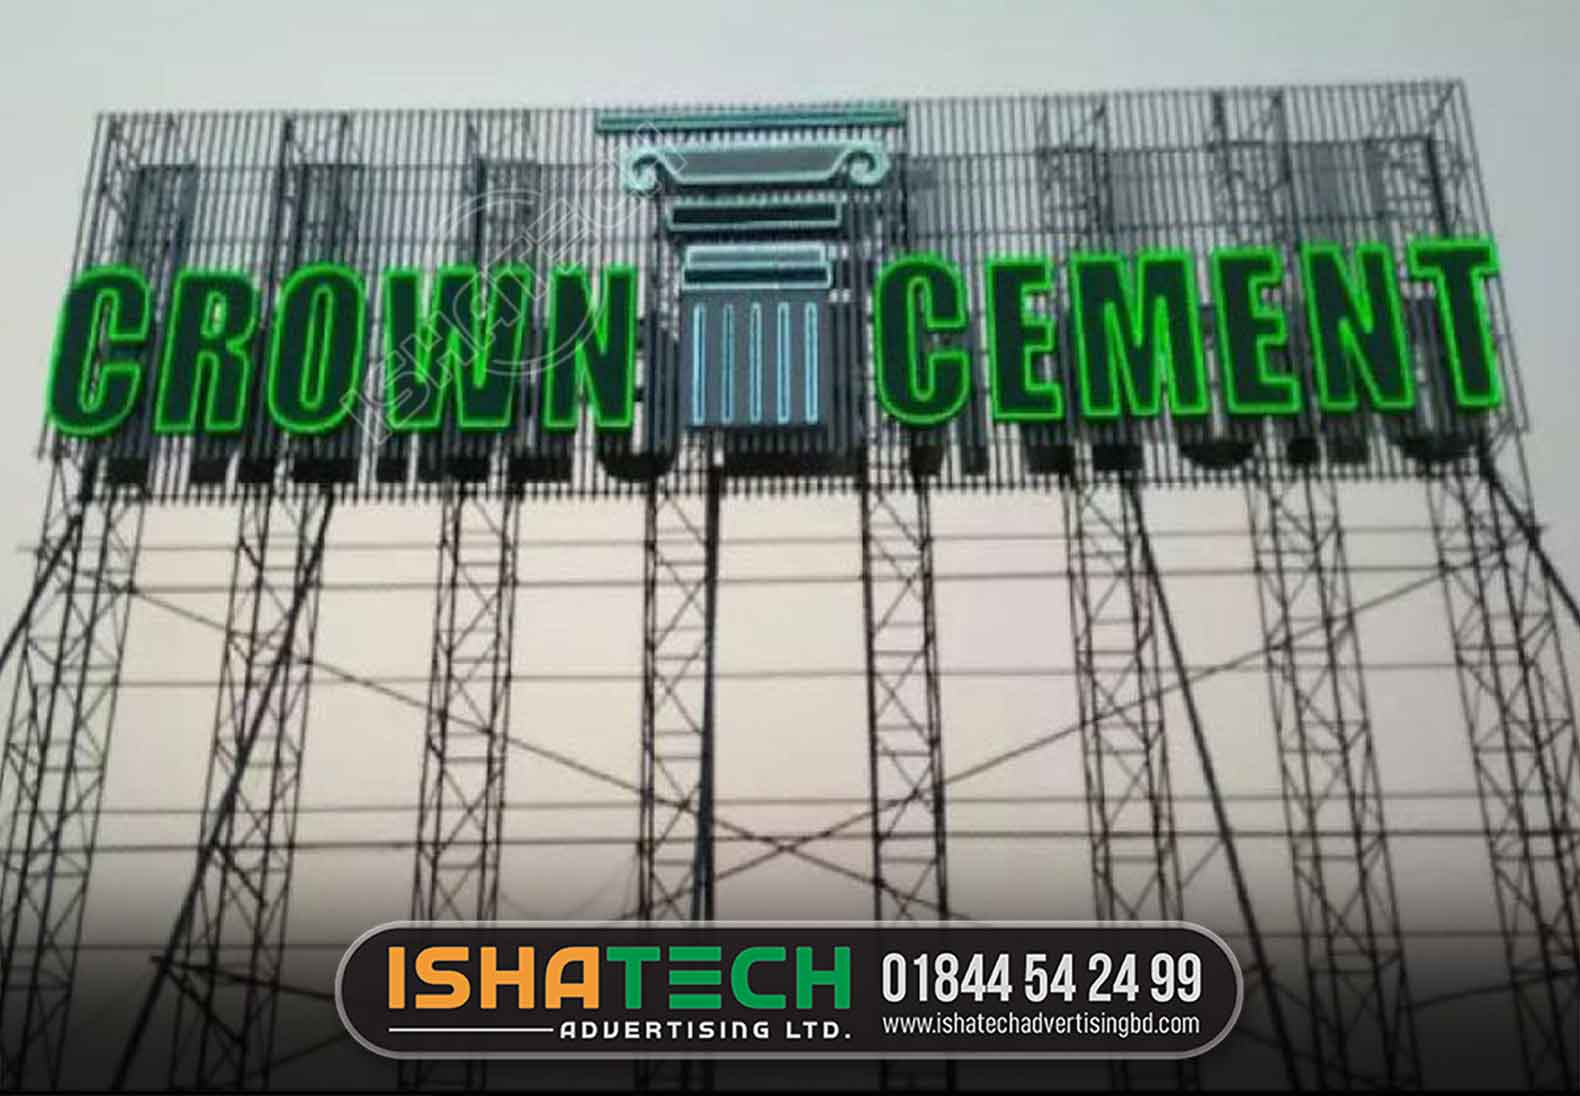 CROWN CEMENT SHOP STAINLESS STEEL AND NEON LETTER BILLBOARD WITH ISHATECH ADVERTISING LTD | BEST SIGNBOARD ADS BD